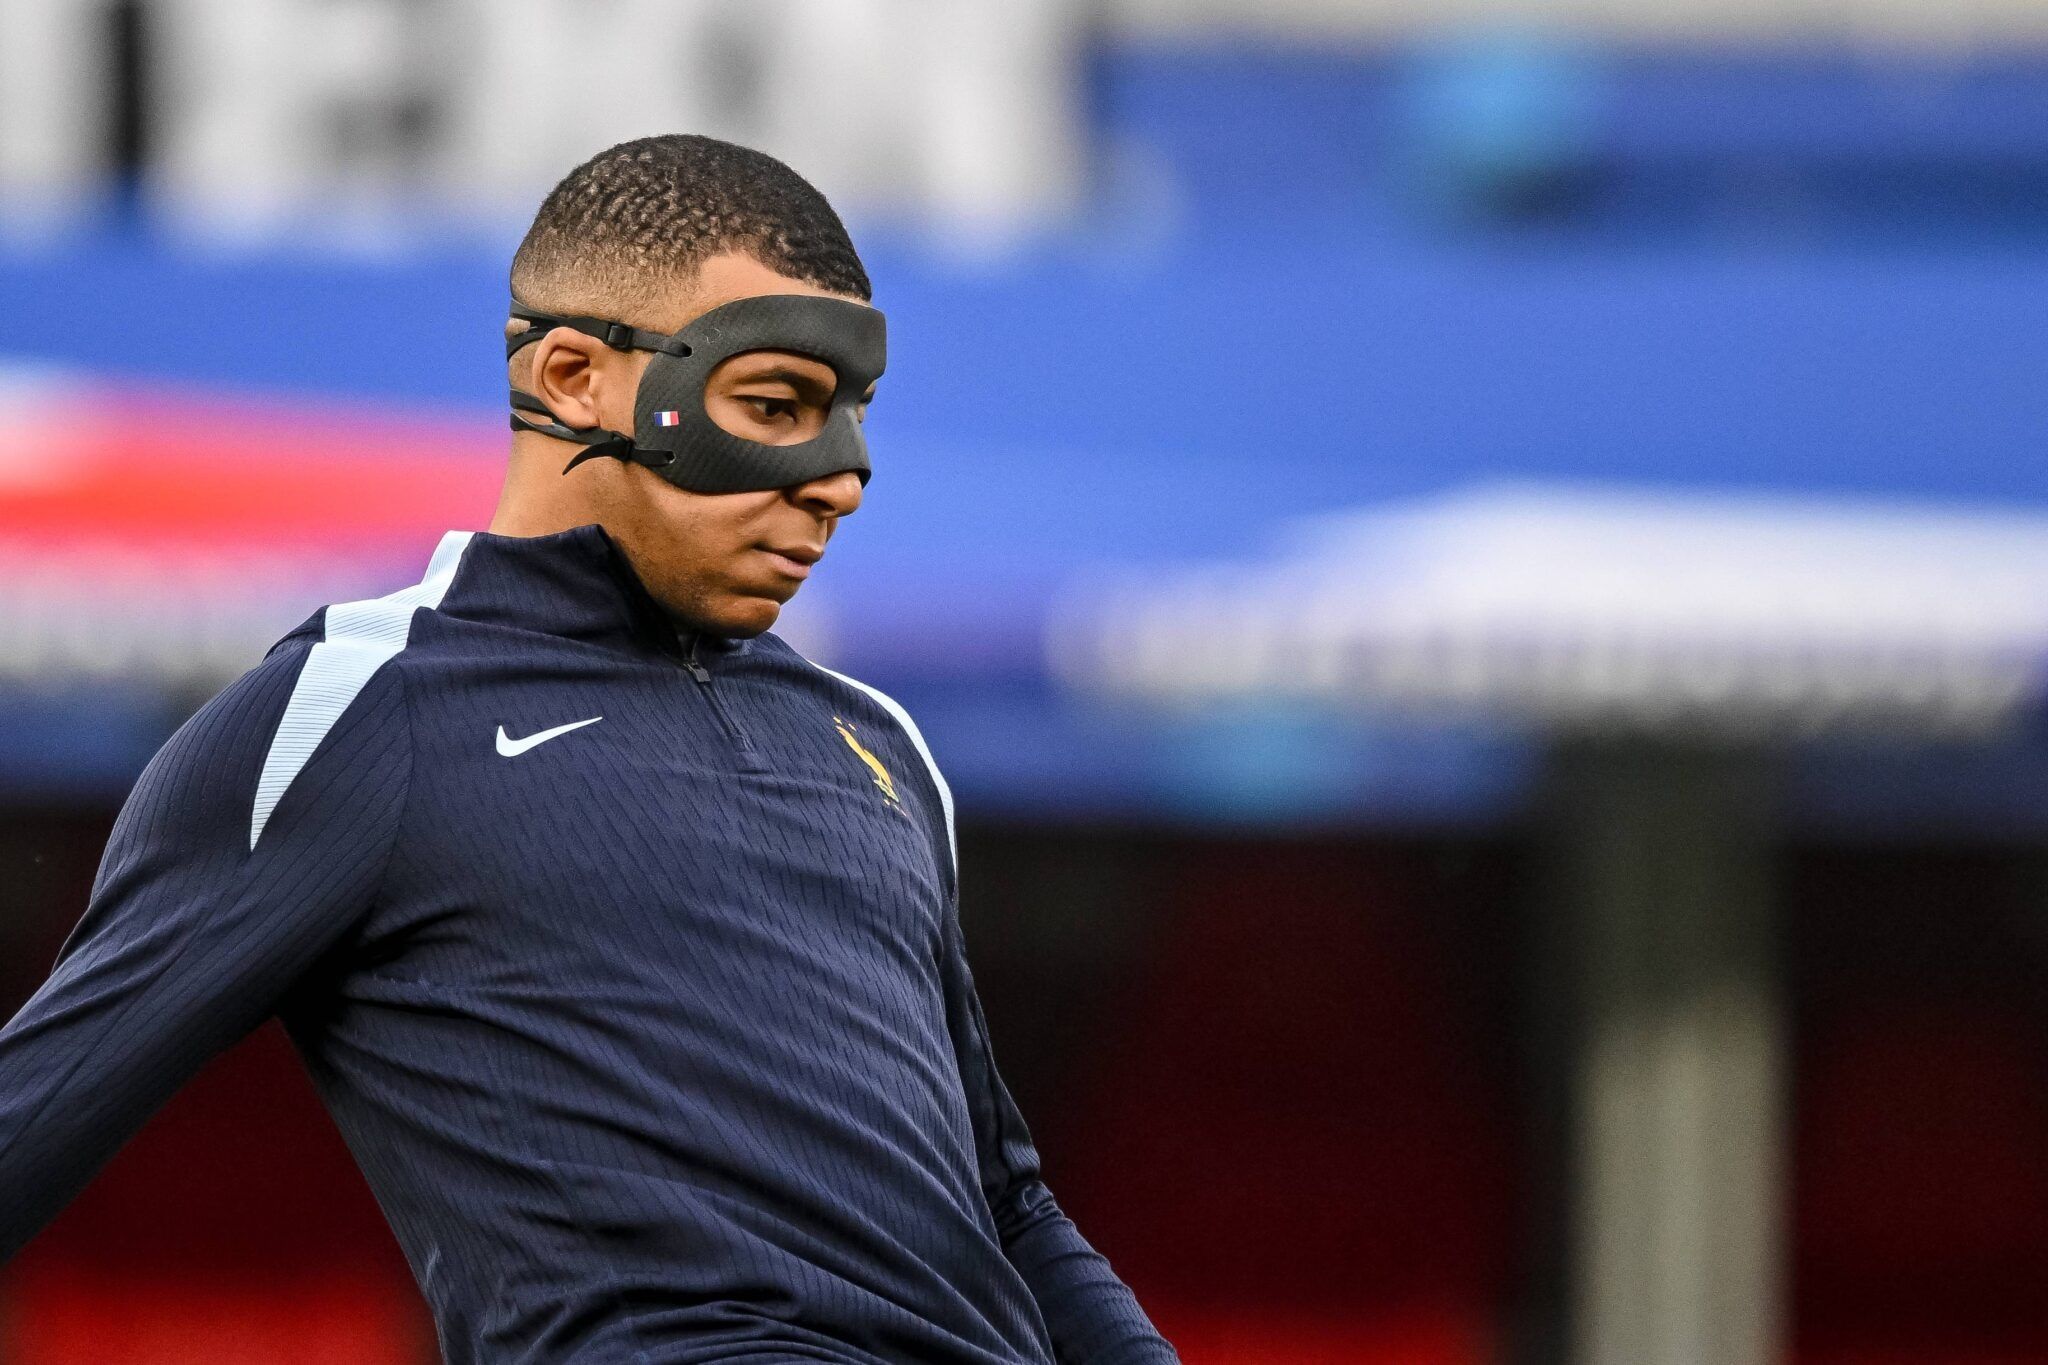 France Coach Deschamps Answers Whether Mbappe Is Ready to Play Against Poland